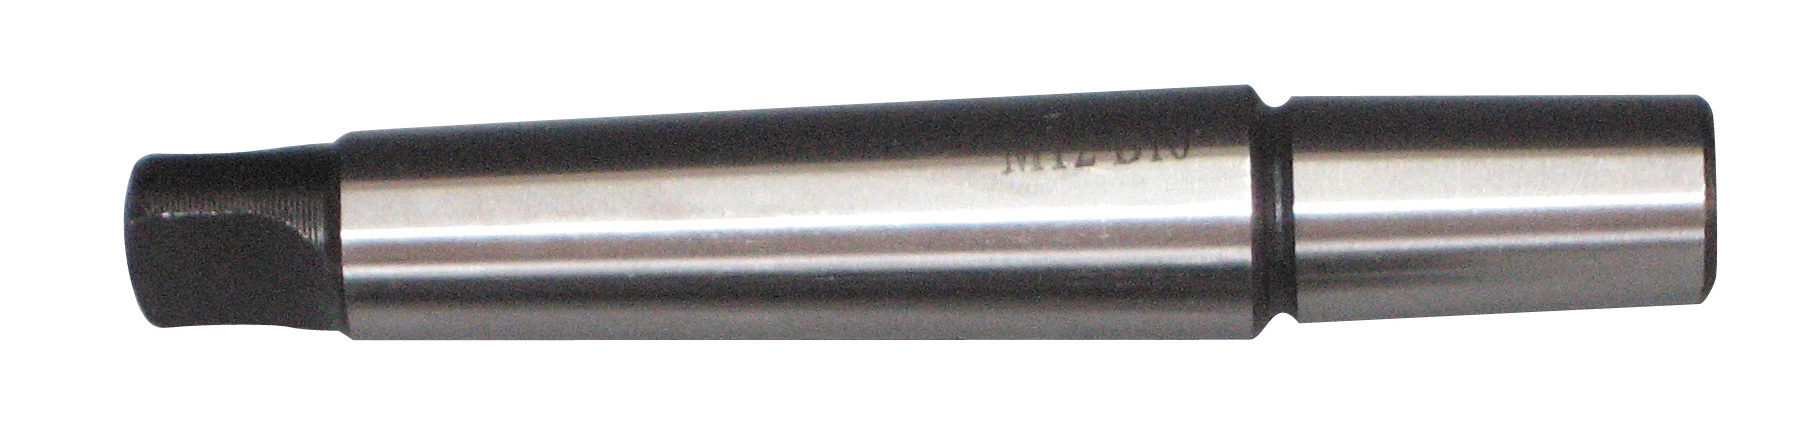 Taper pin with holding fixture MK2